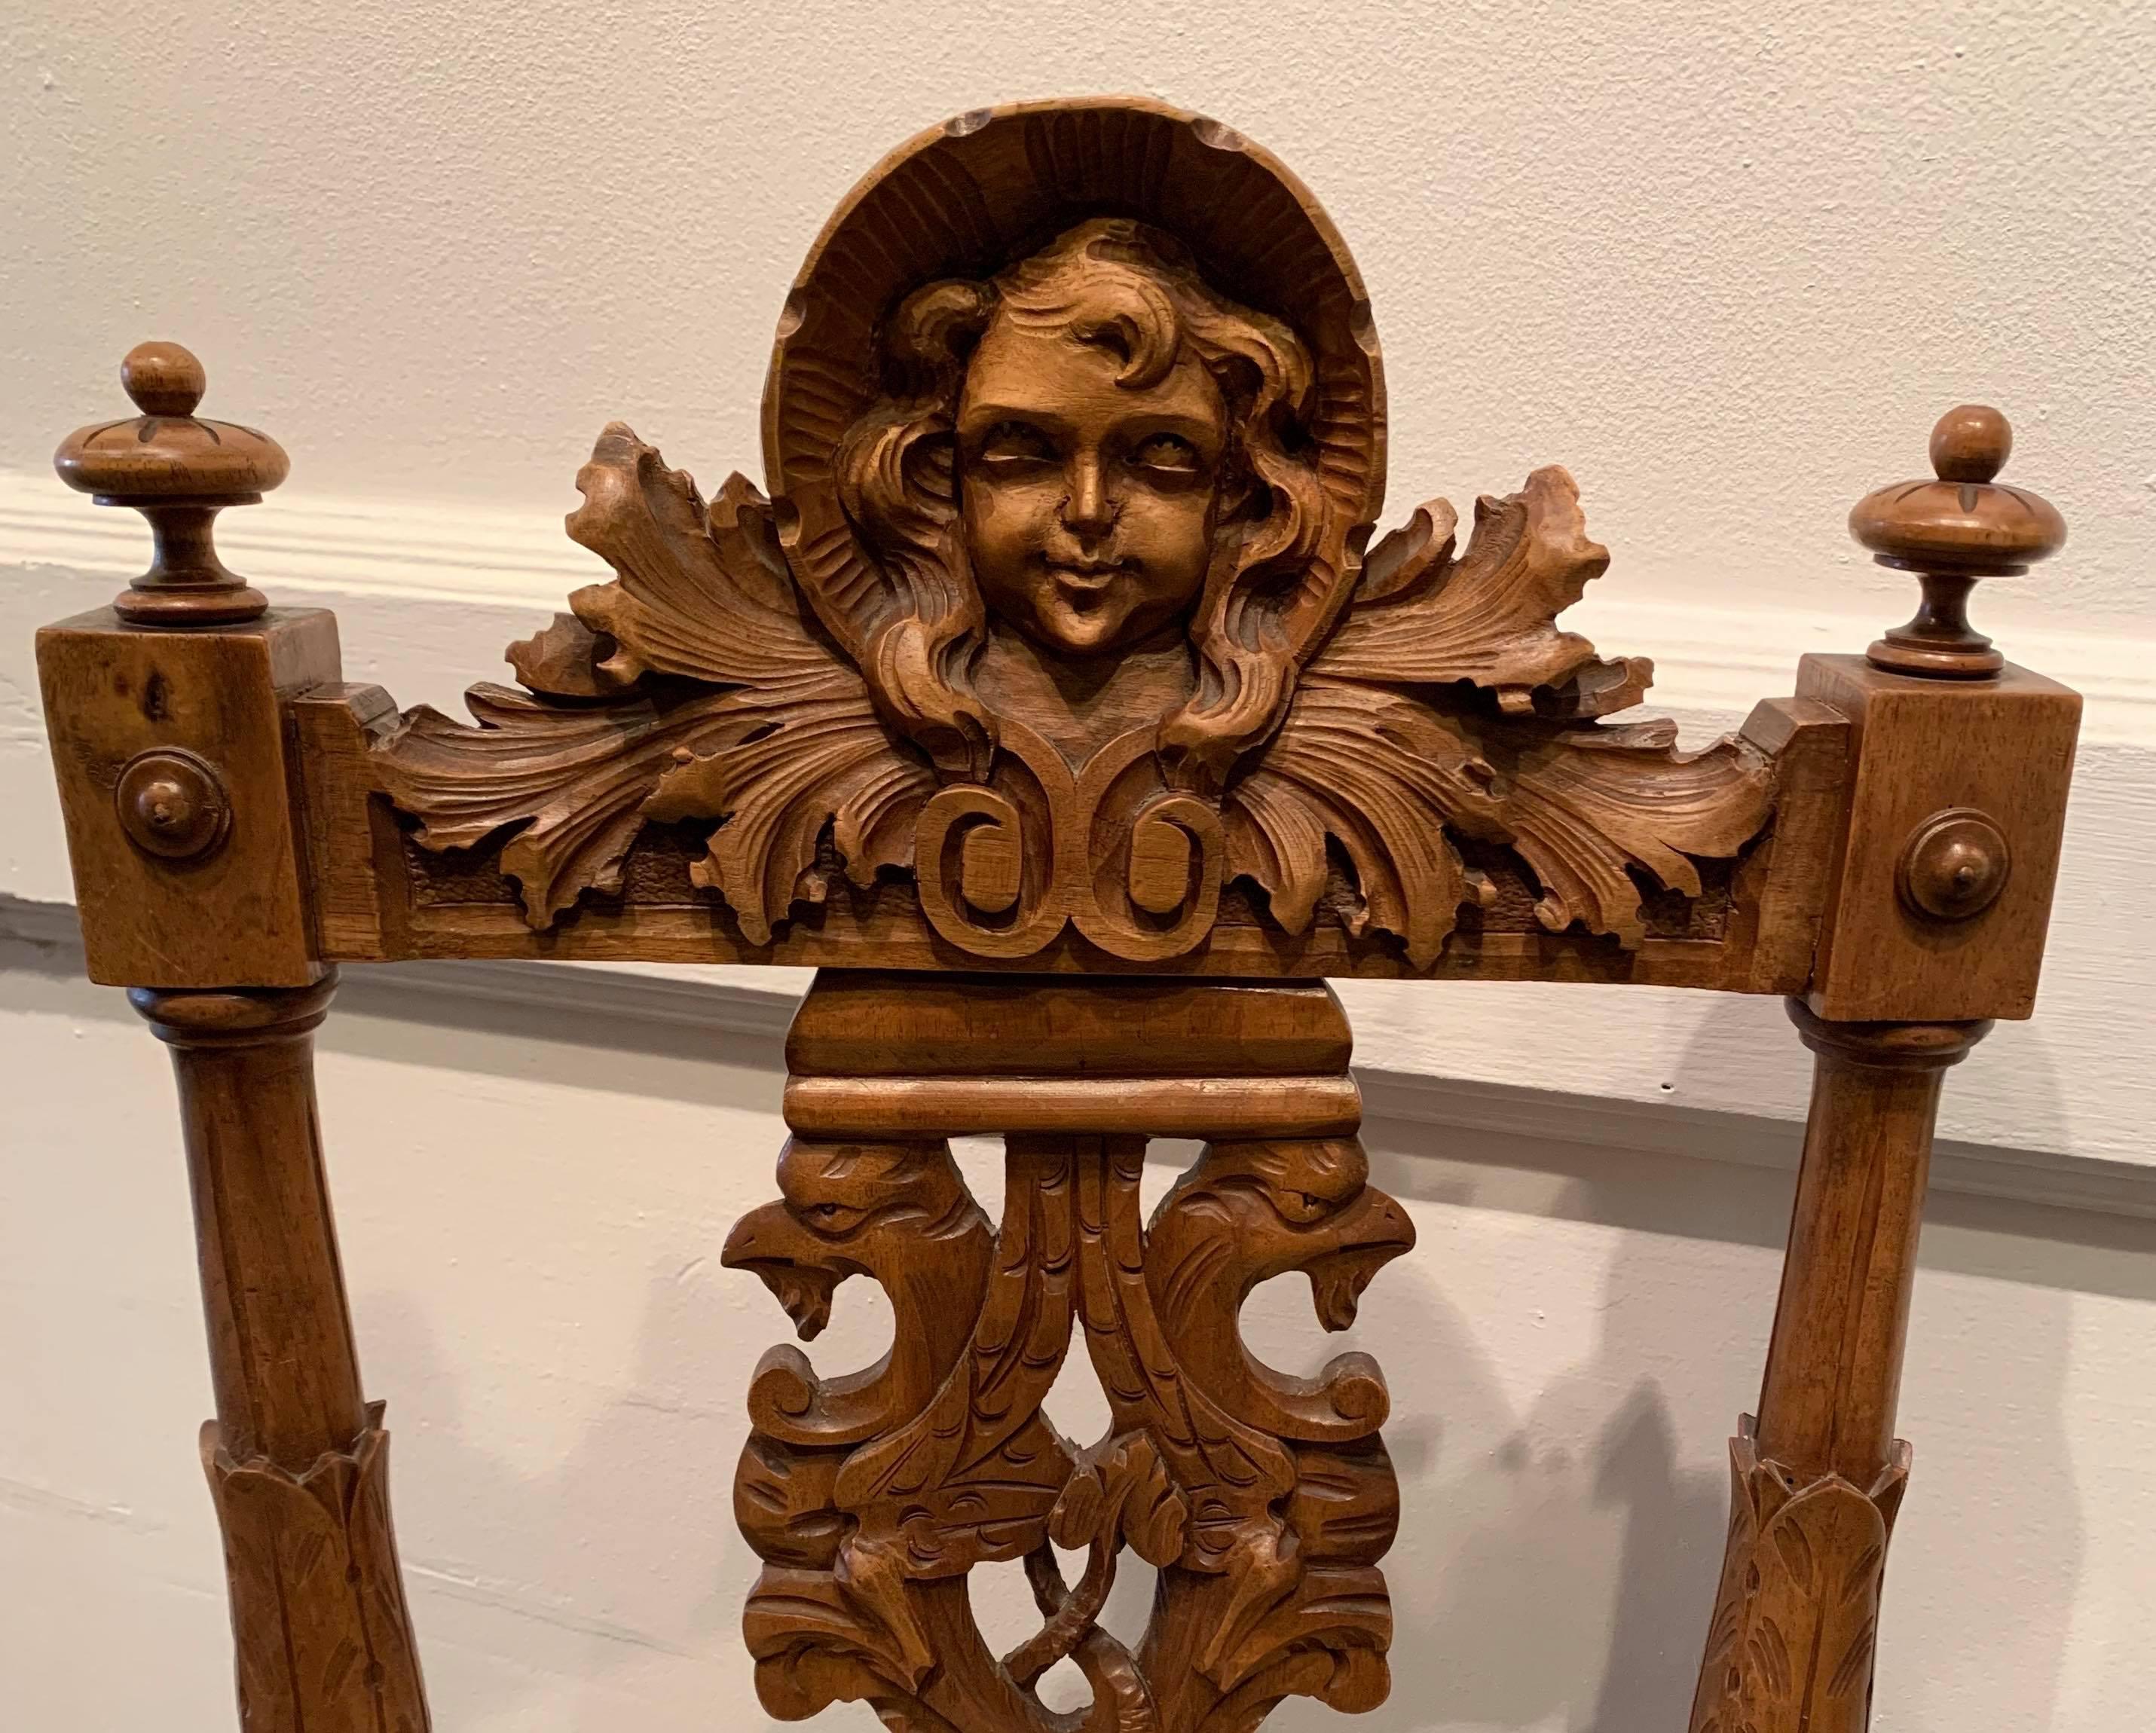 19th Century Pair of Hand-Carved Hall Chairs from Mexico - Sculpture by Unknown